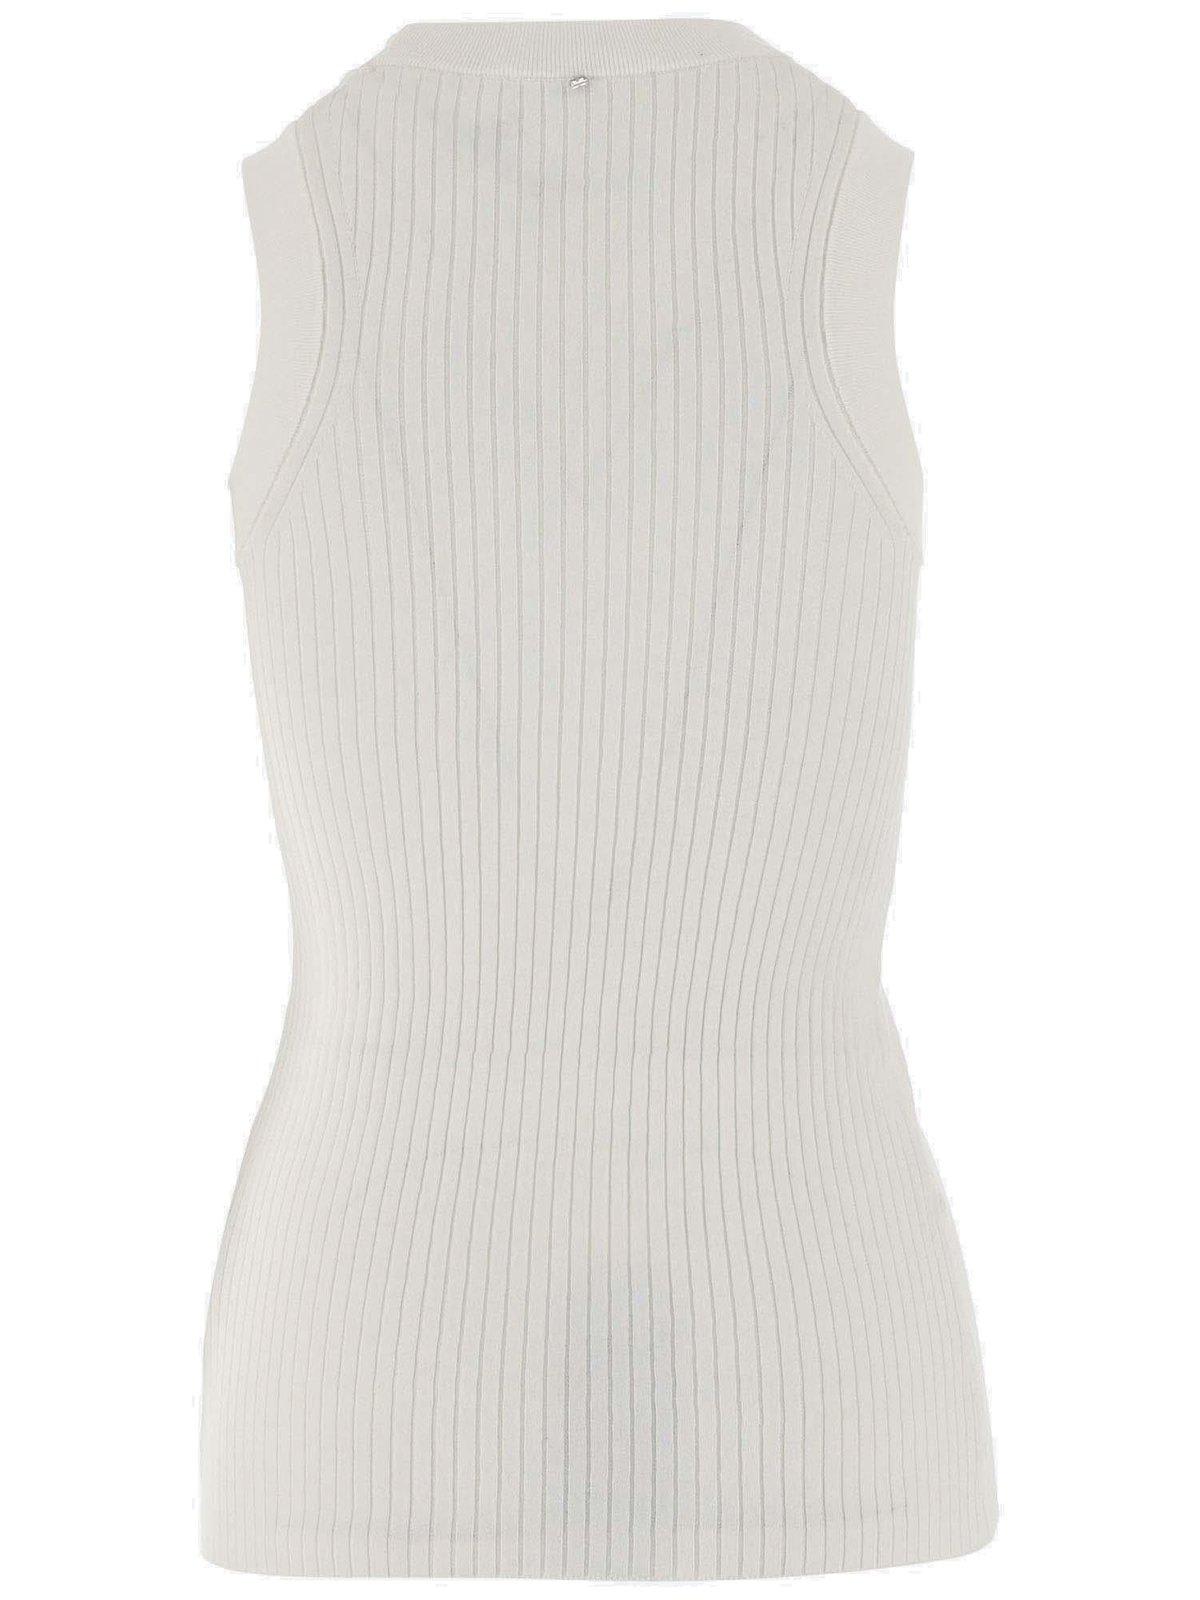 Shop Sportmax Crewneck Sleeveless Knitted Top In Bianco